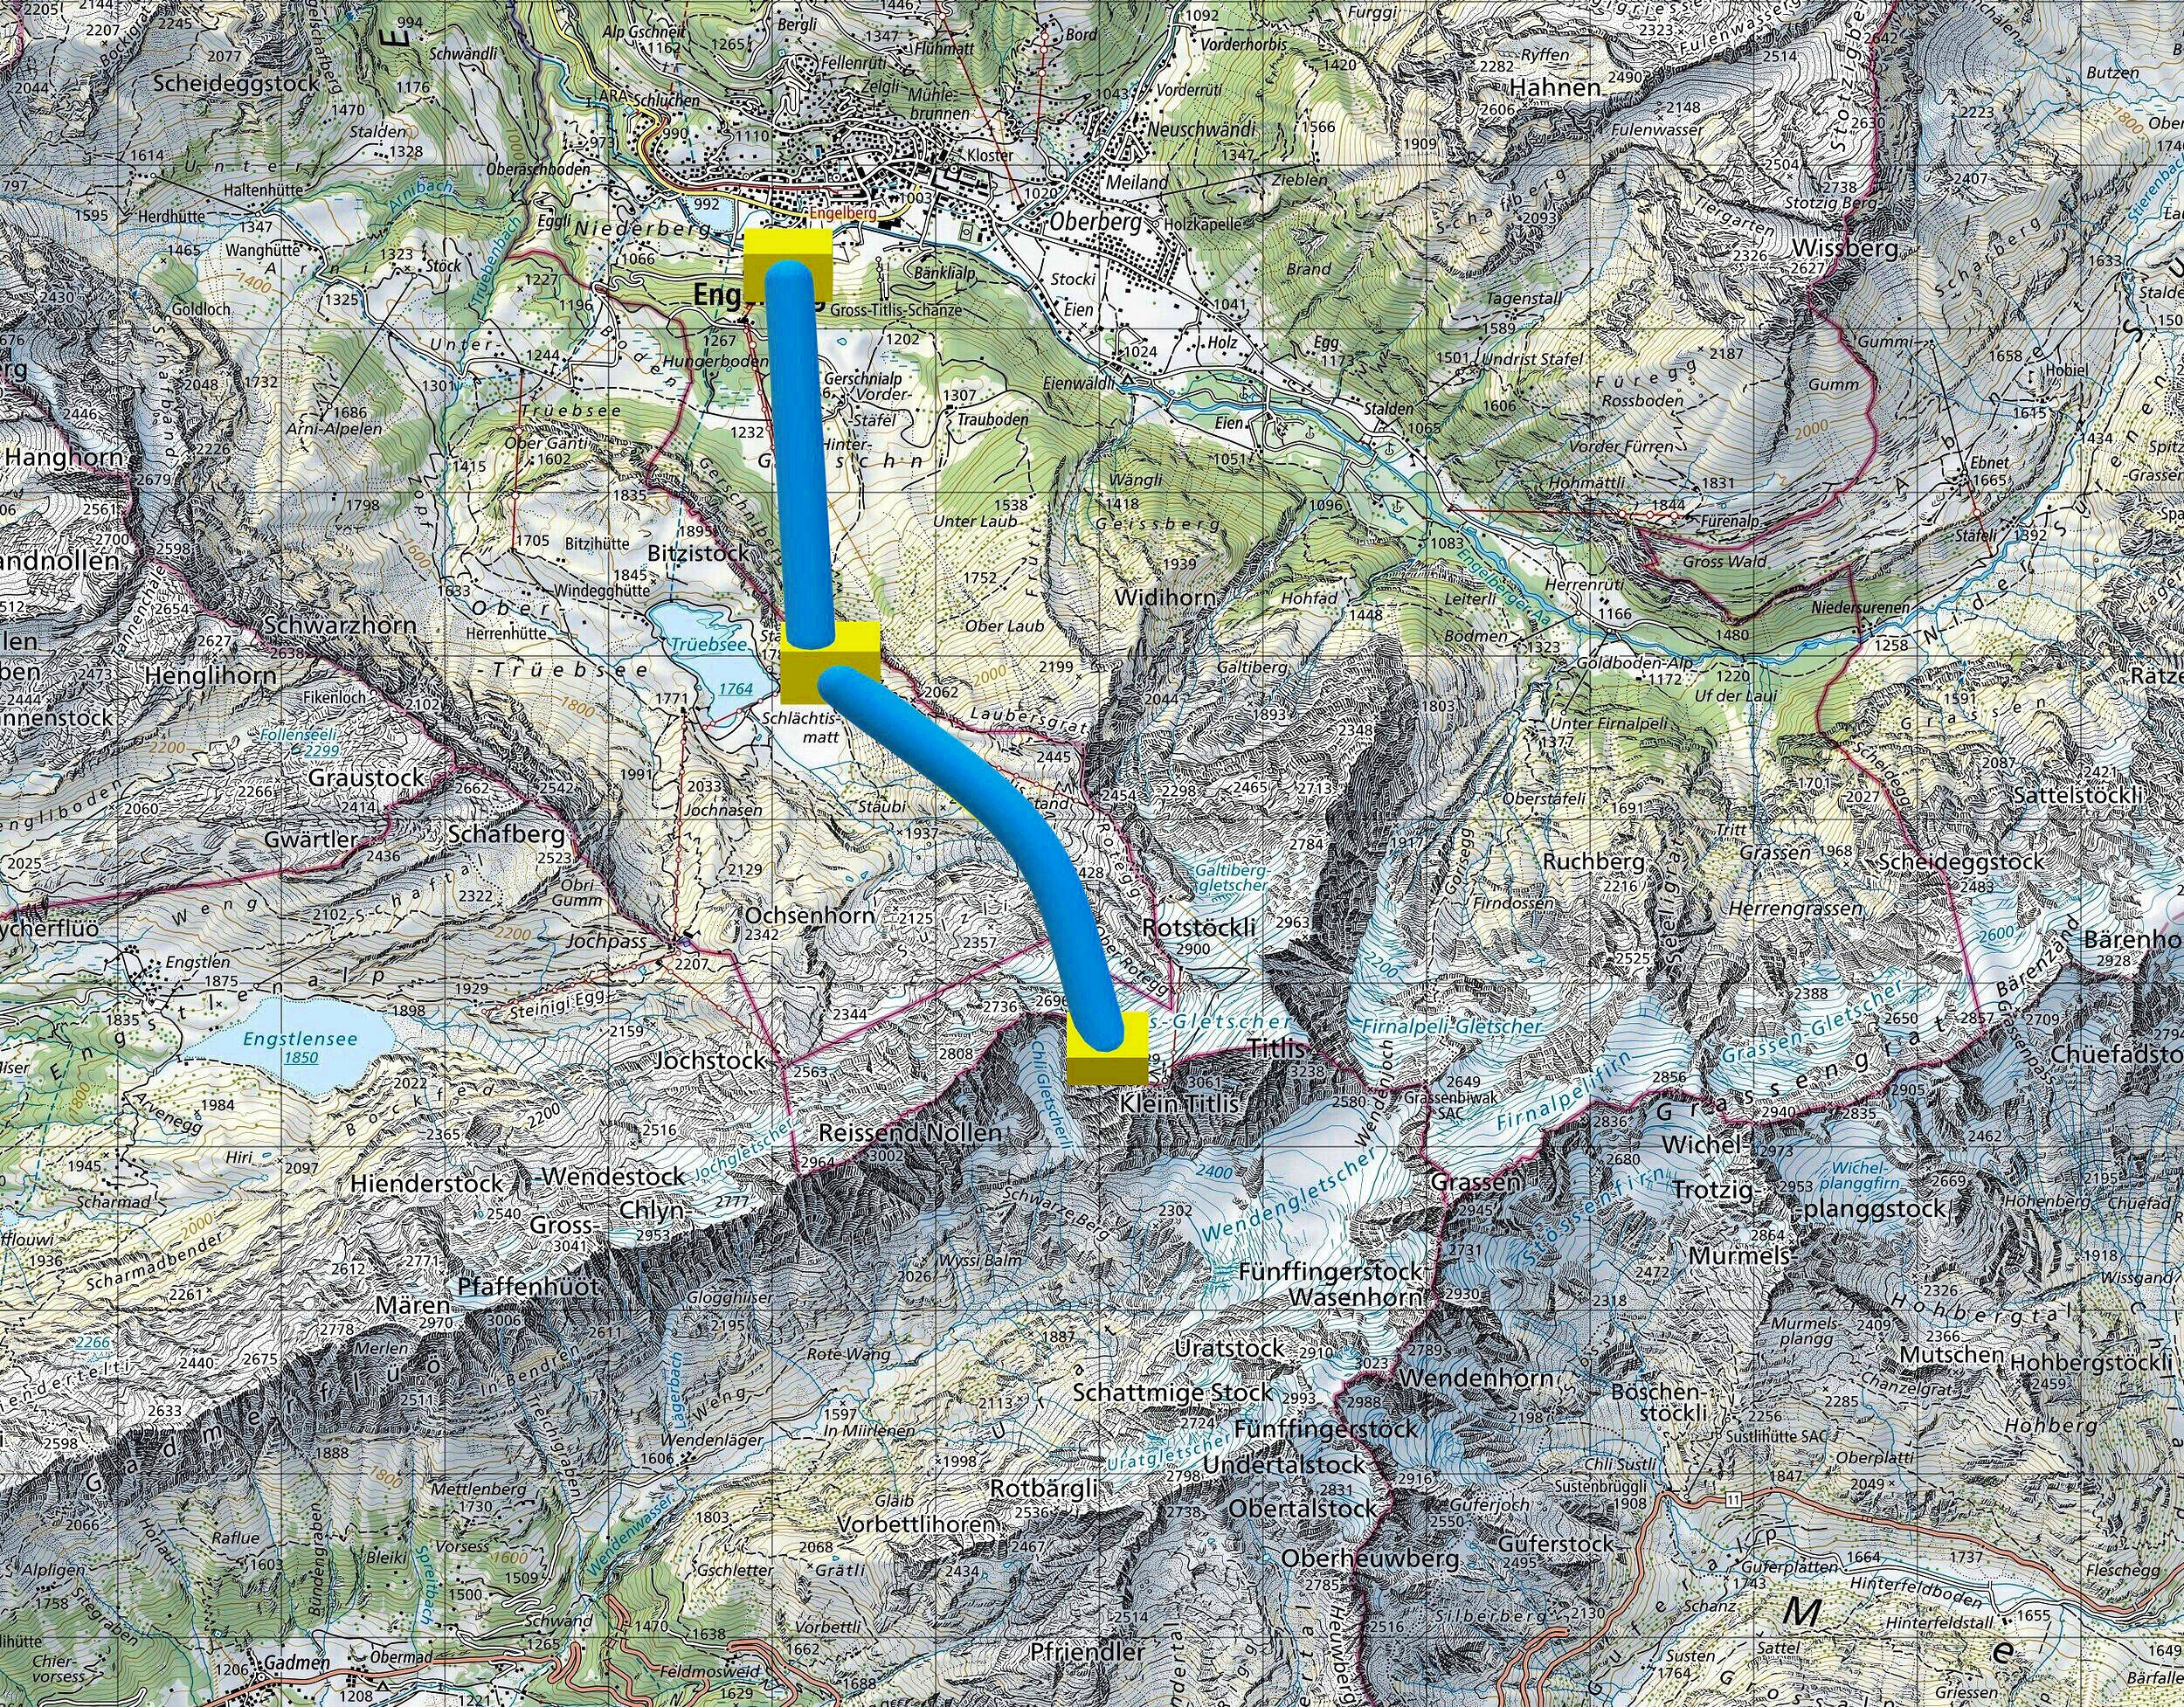 Travel route from Engelberg to Mt. Titlis by aerial cable carsSource (map): Swiss Federal Office of Topography swisstopo